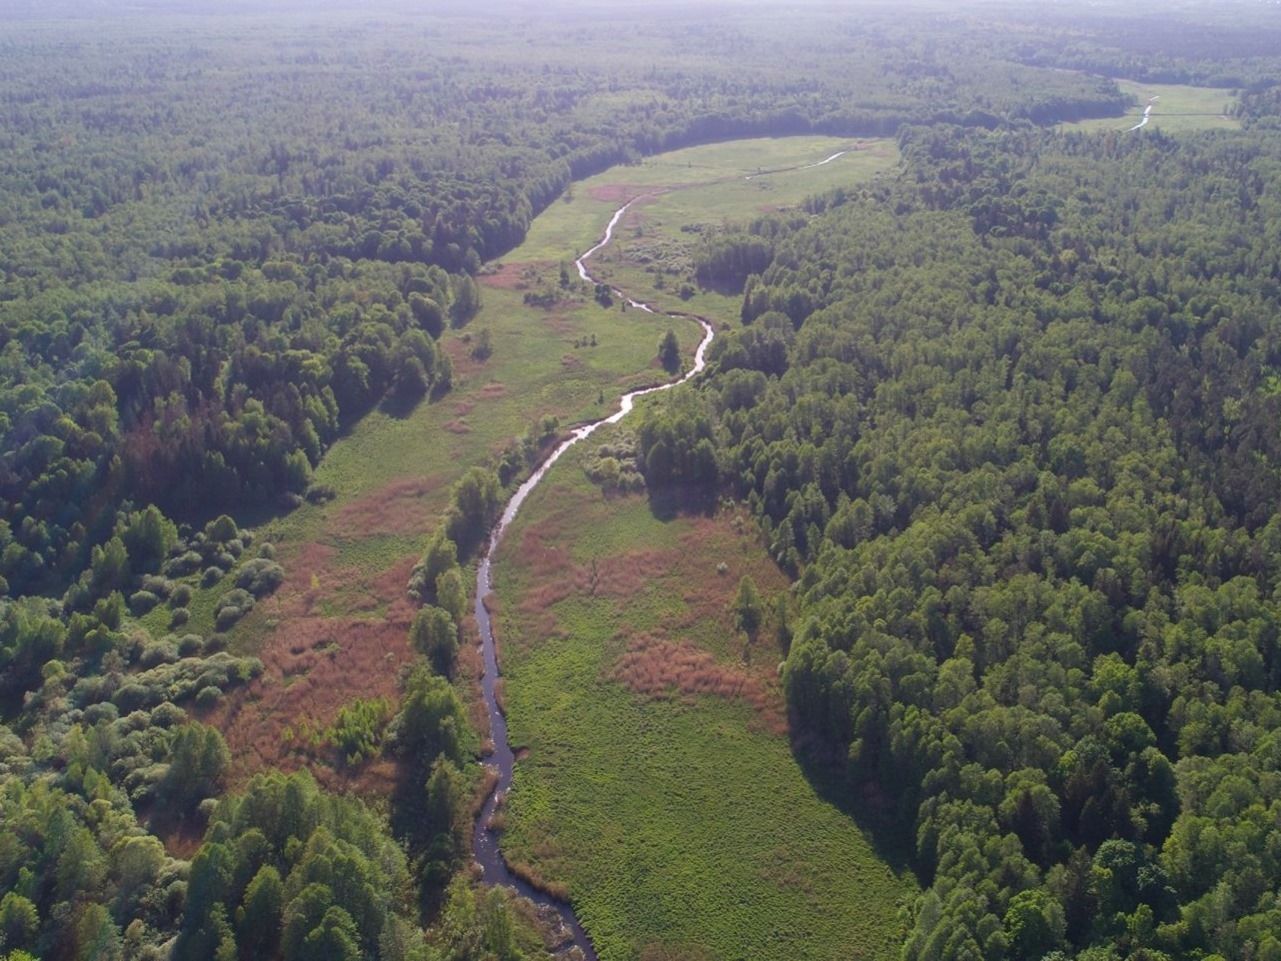 "Alignment (channelling) greatly affects the life of the river. The hydrological regime is changing, followed by that of flora and fauna. For Belovezhskaya Pushcha, the alignment of numerous rivers has become one of the reasons for a strong drop in the groundwater level. Such rivers no longer water the forest, but dry it," explains Viktor Fenchuk, coordinator of the programme of the Frankfurt Zoological Society in Belarus